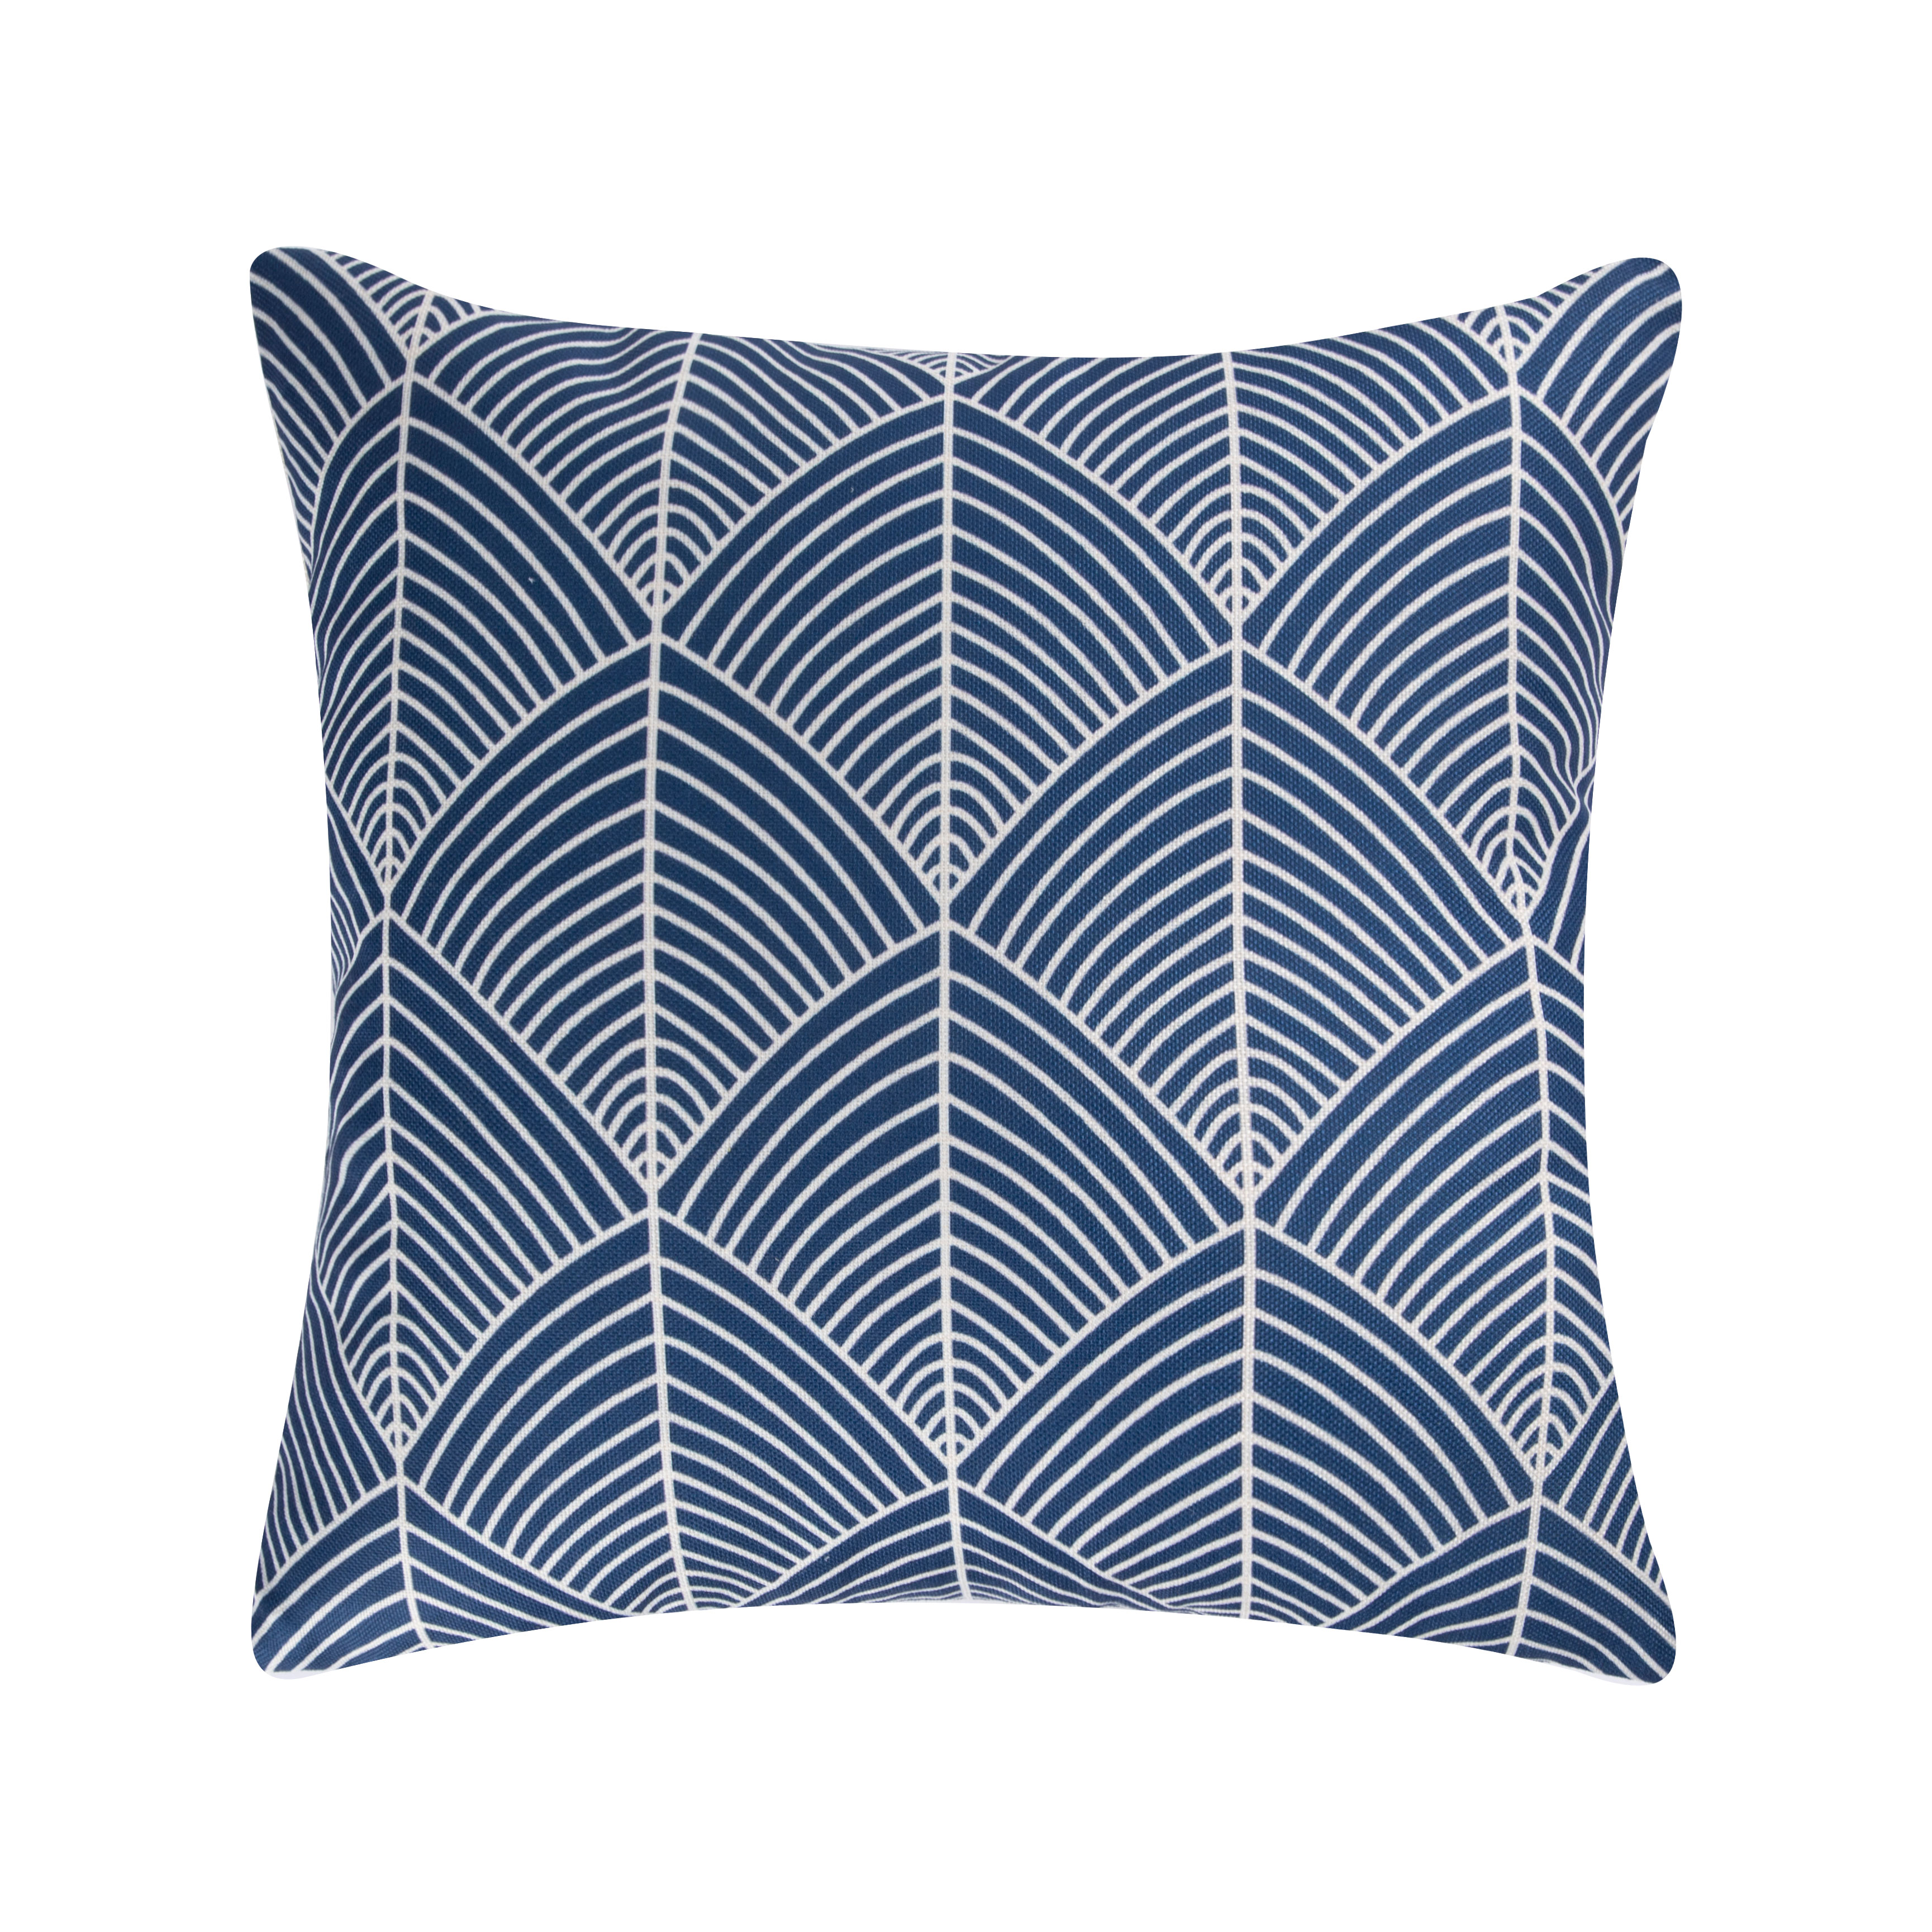 Bene Boutique Arch Stripe Square Throw Pillow Cover